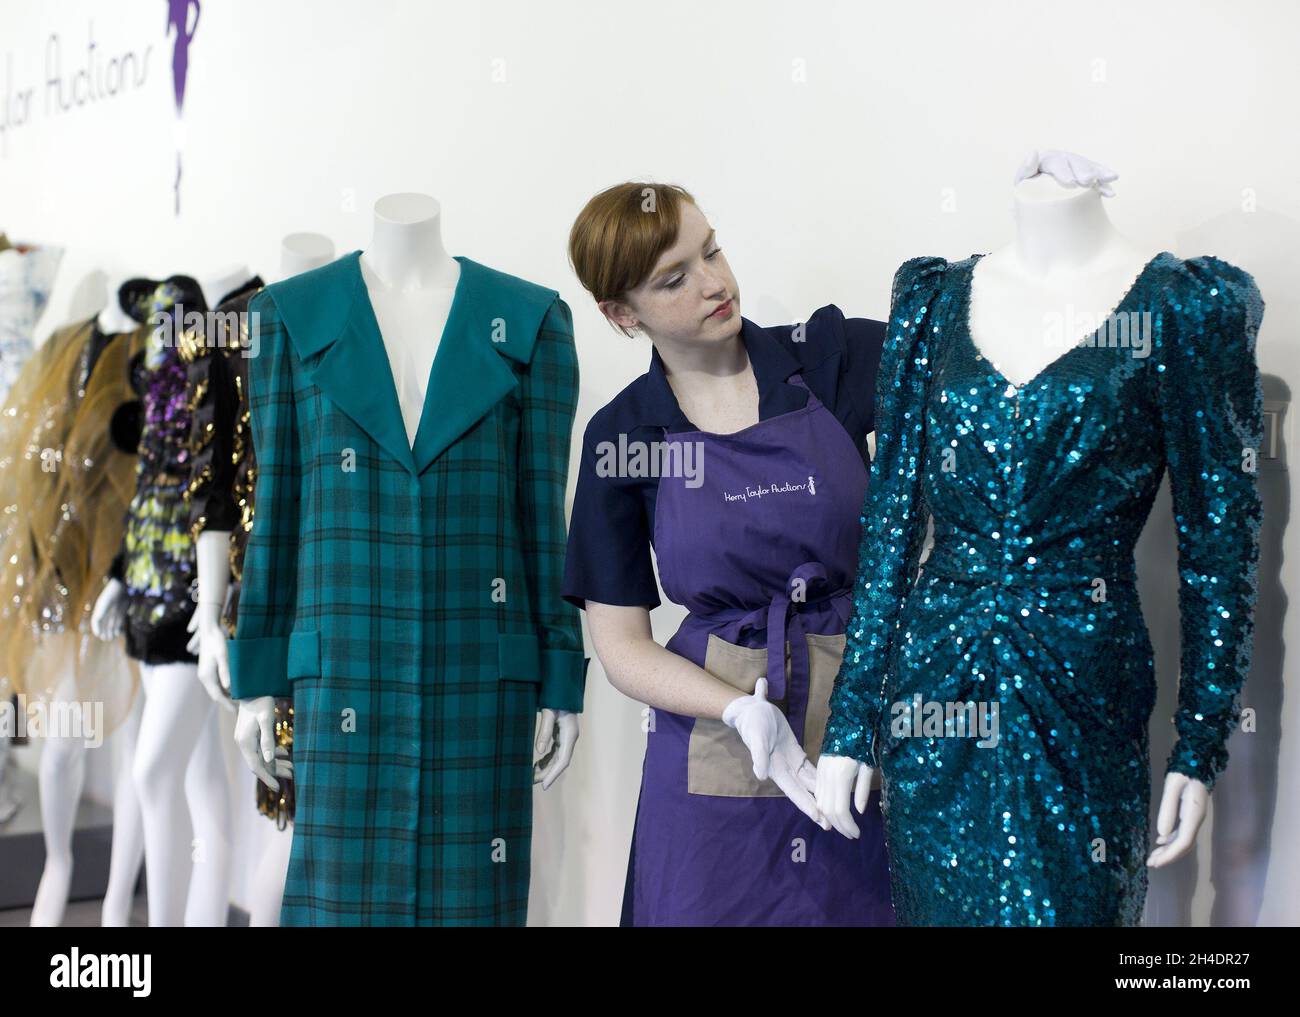 Auction assistant Lucy Bishop puts the finishing touches to two dresses worn by Princess Diana, both in shades of teal-blue/green, part of the June 14th  Passion for fashion auction at Kerry Taylor Auctions in south London.  (Left) Lot 208, a practical large tartan check with wide padded shoulders with Diana's trademark sailor-collar, designed by Elizabeth and David Emanuel, estimate £10,000-15,000.  (Right) Lot 210, a glamorous gown split to the knee by designer Catherine Walker, estimate £80,000-100,000. Stock Photo